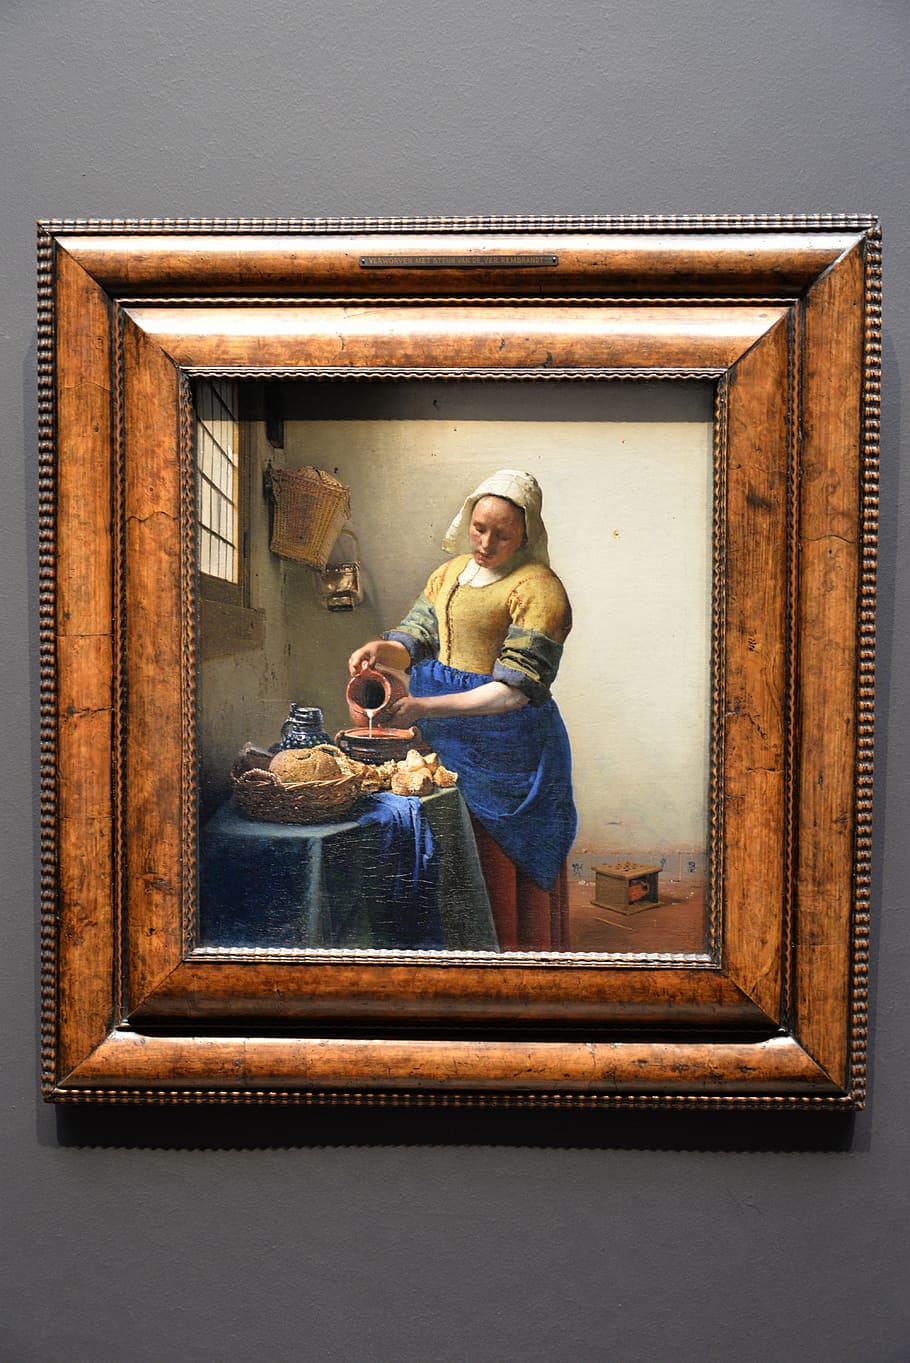 vermeer, dairy, painting, light, golden age, holland, masters of light, rijksmuseum, one person, casual clothing